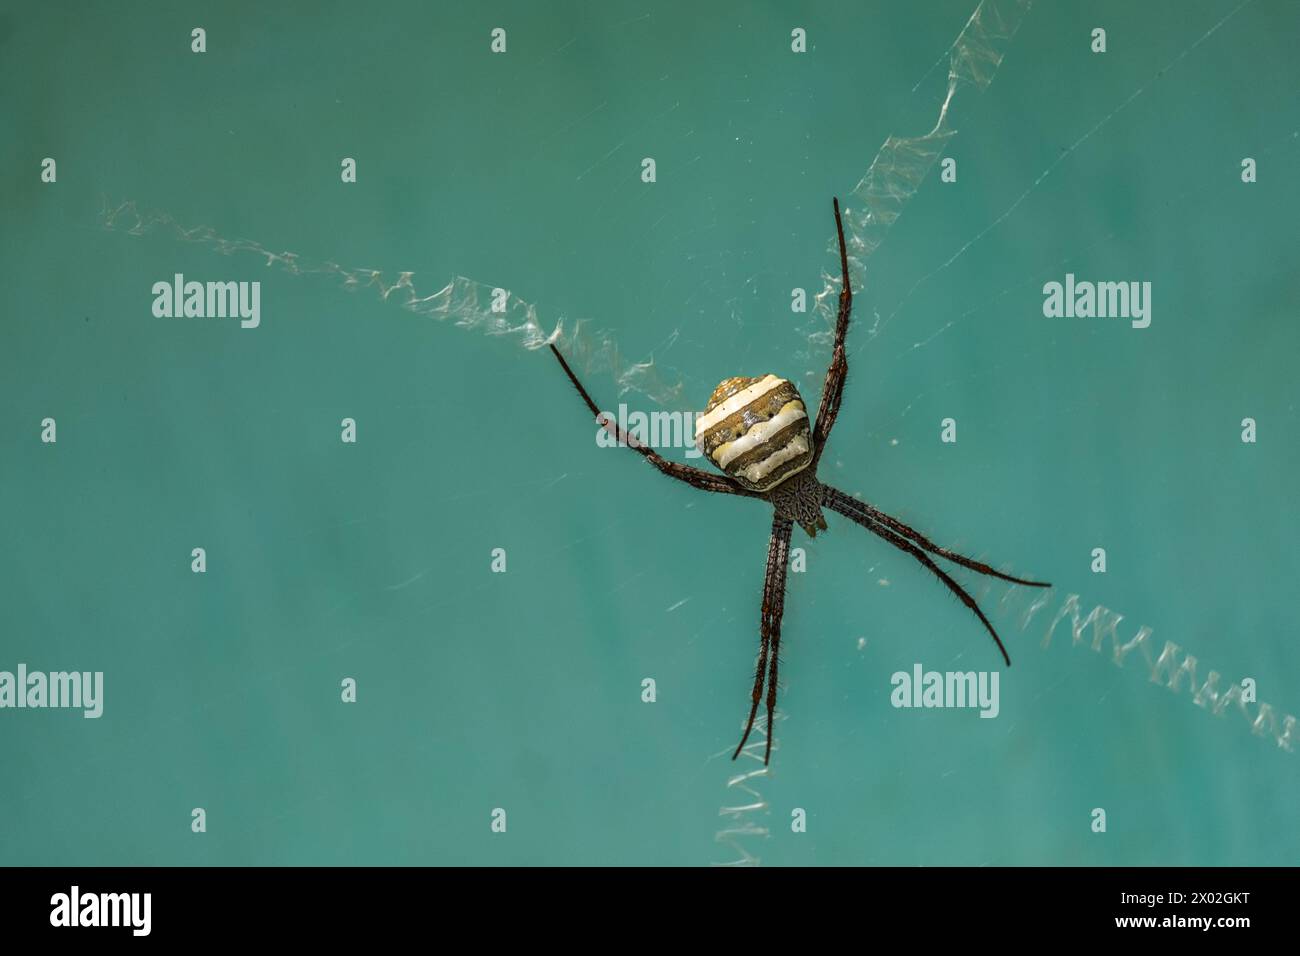 A female garden cross spider (argiope pulchella) with a striped abdomen rests at the centre of its web between four stabilimentum. Stock Photo